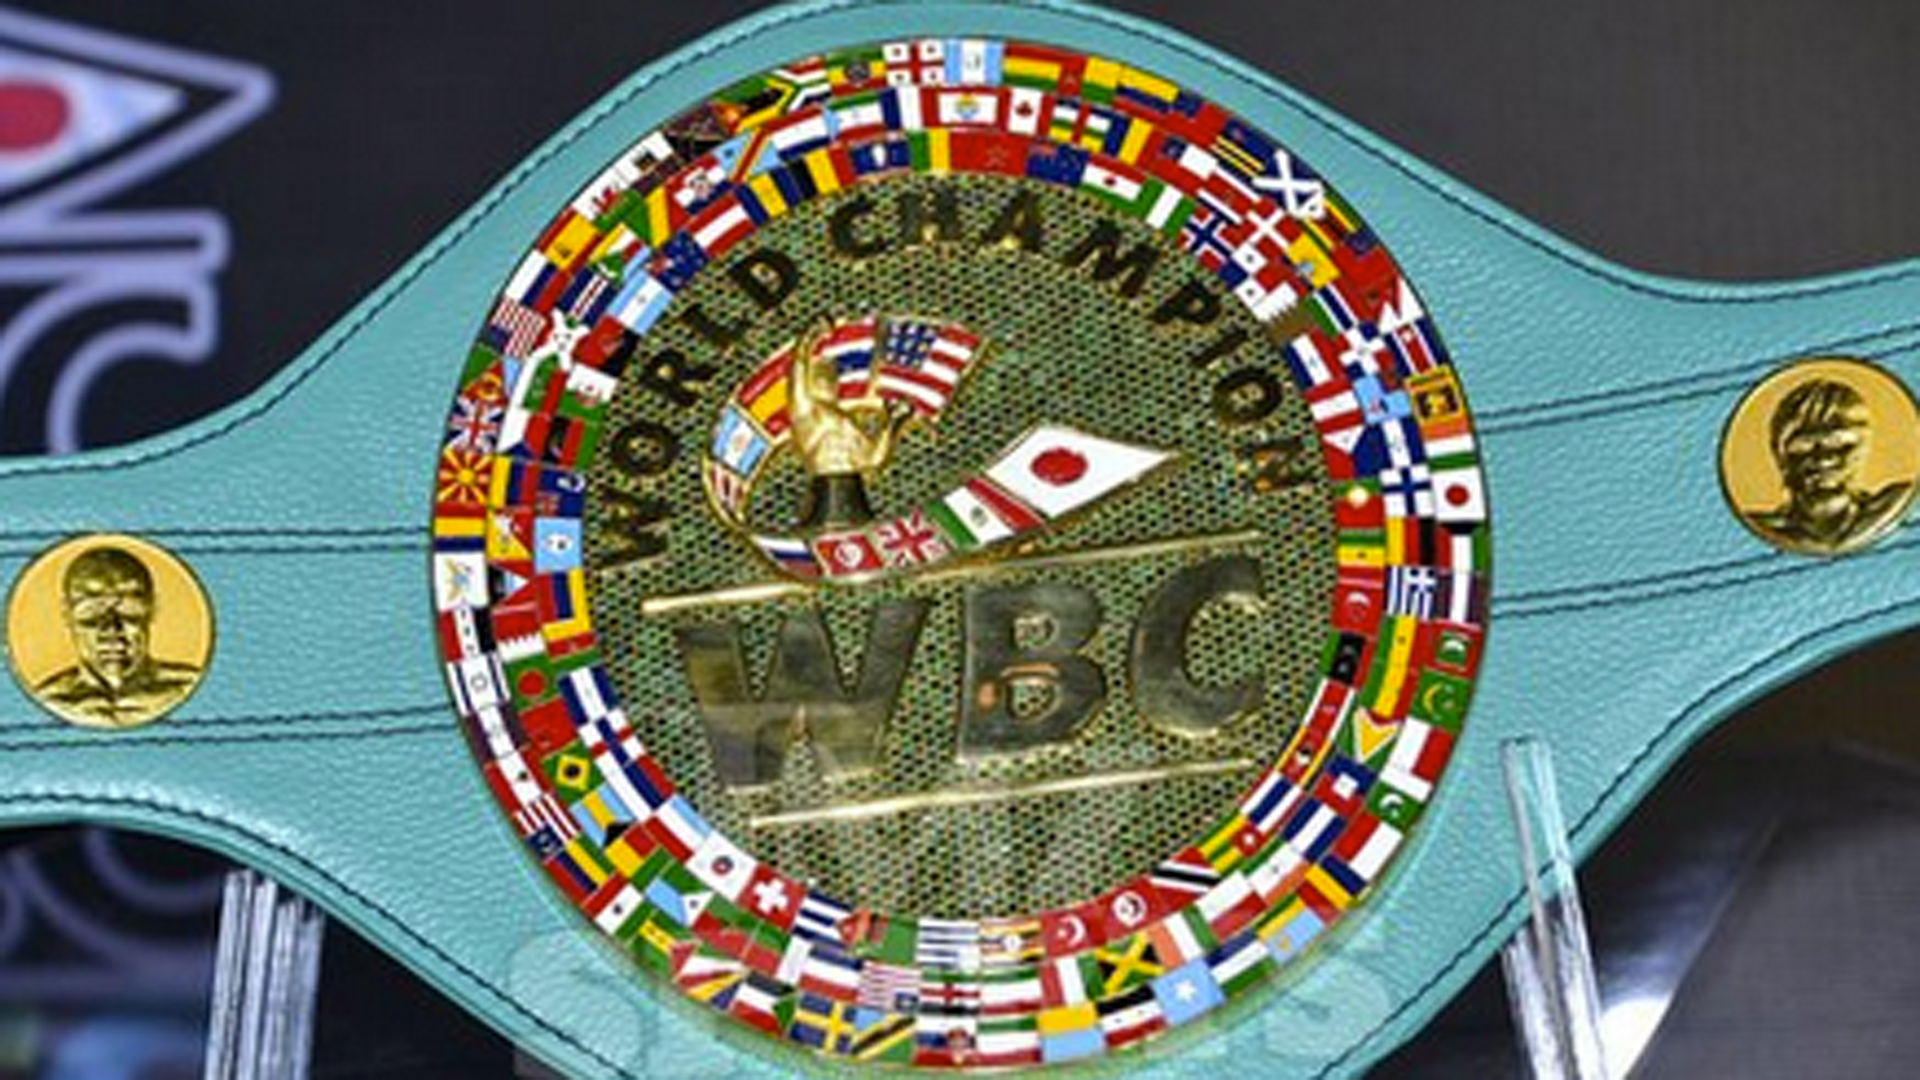 Mayweather and Pacquiao to fight for 1 million custom WBC championship